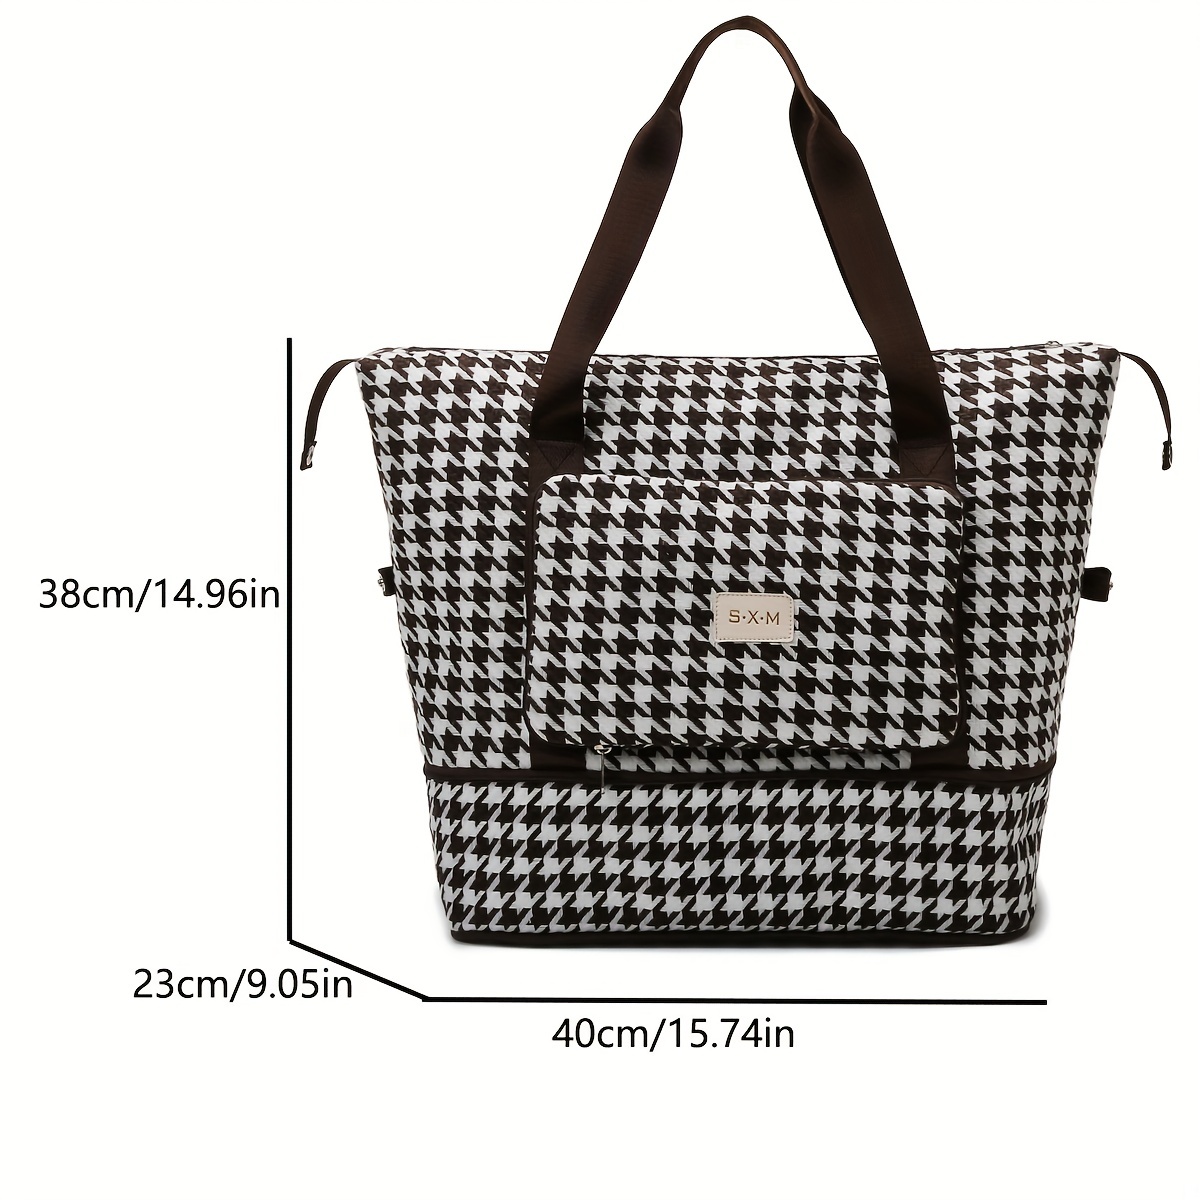 Expended Foldable Travel Duffle Bag, Sports Fitness Gym Tote Bag